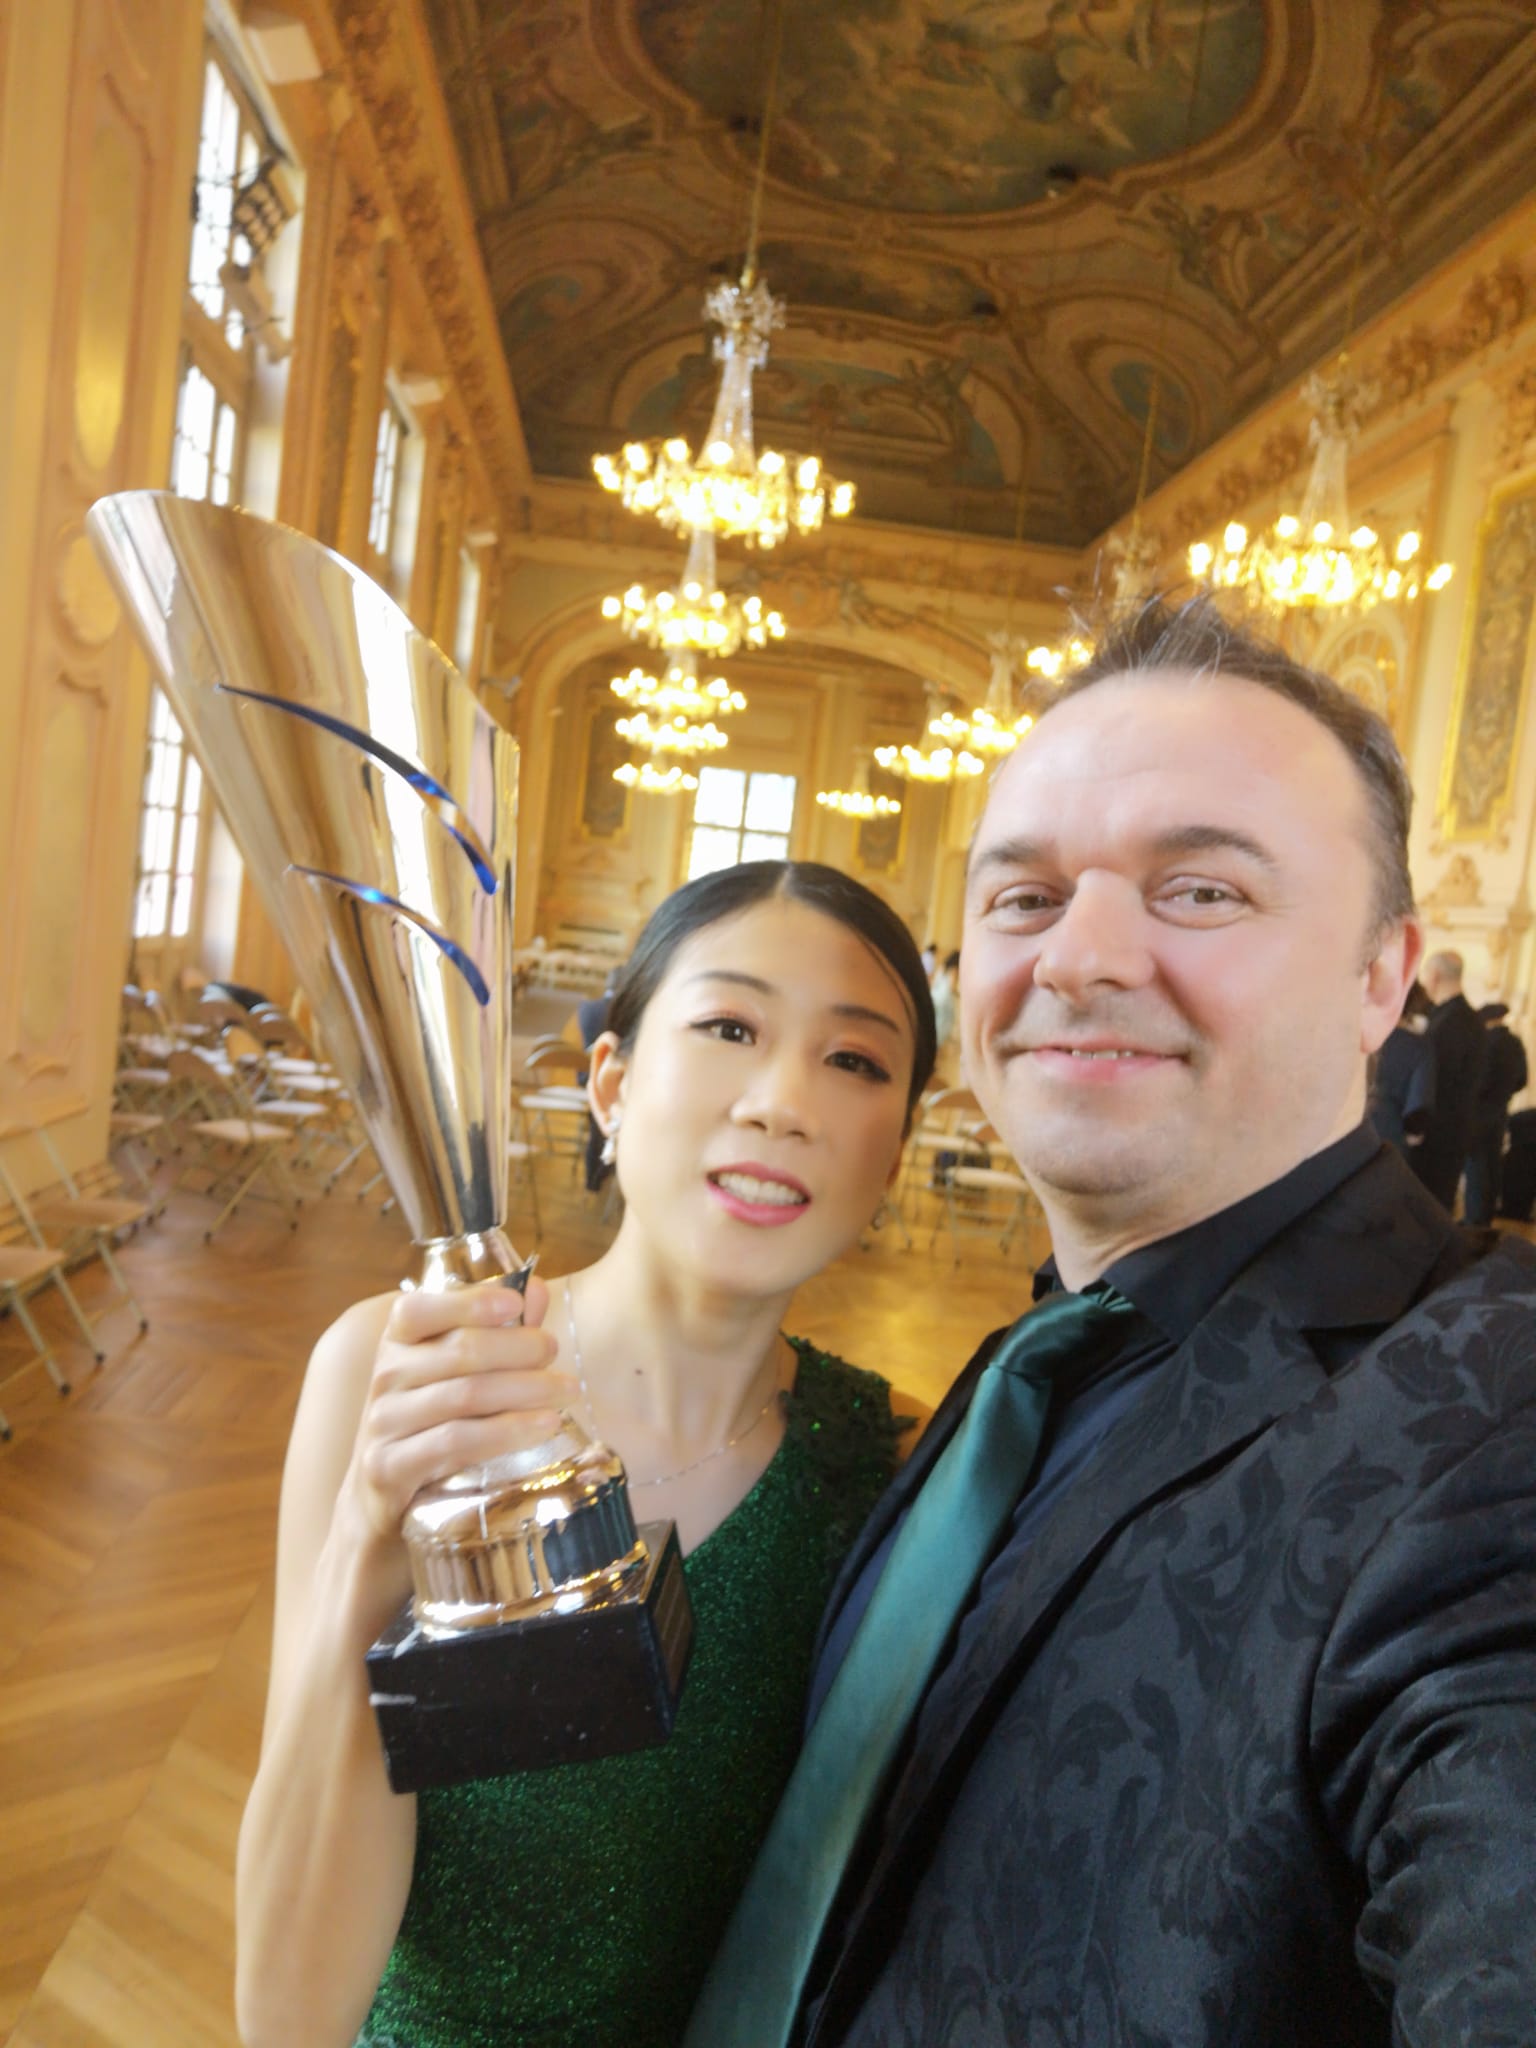 The winners of the Pista Tango Contest 3 000 E Italian and Chinese Couple